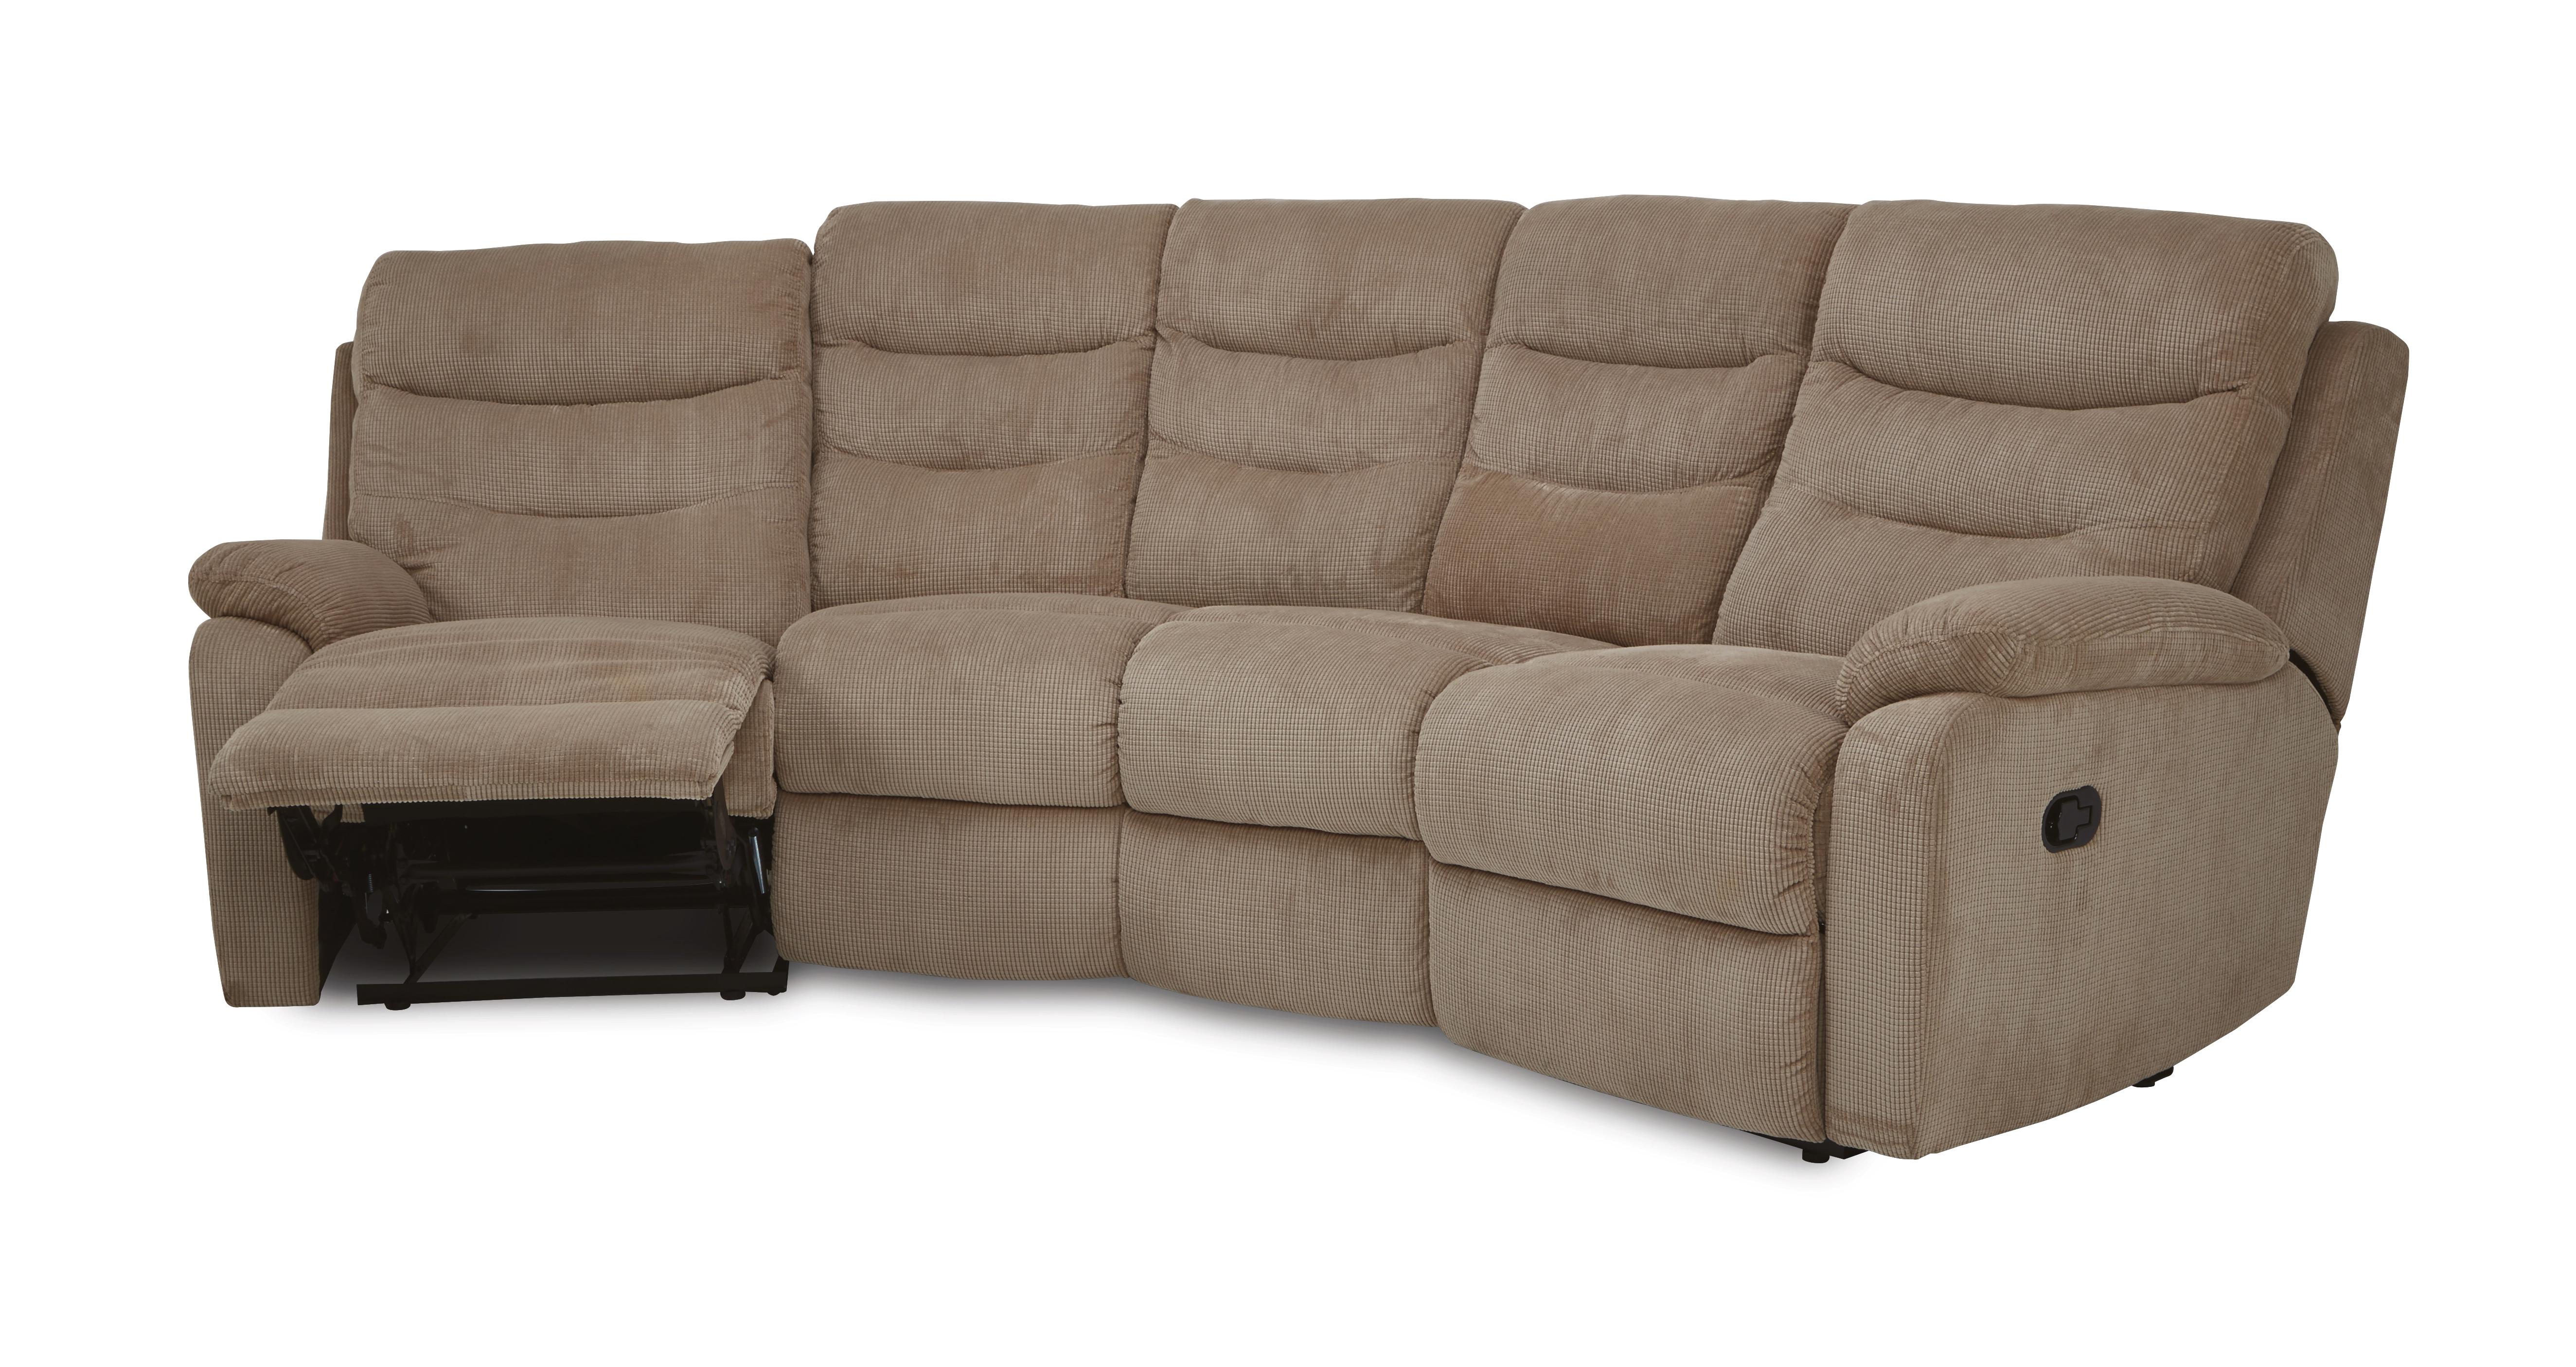 Brilliant Furniture Village Hennessey Sofa Chair In Timber Urban